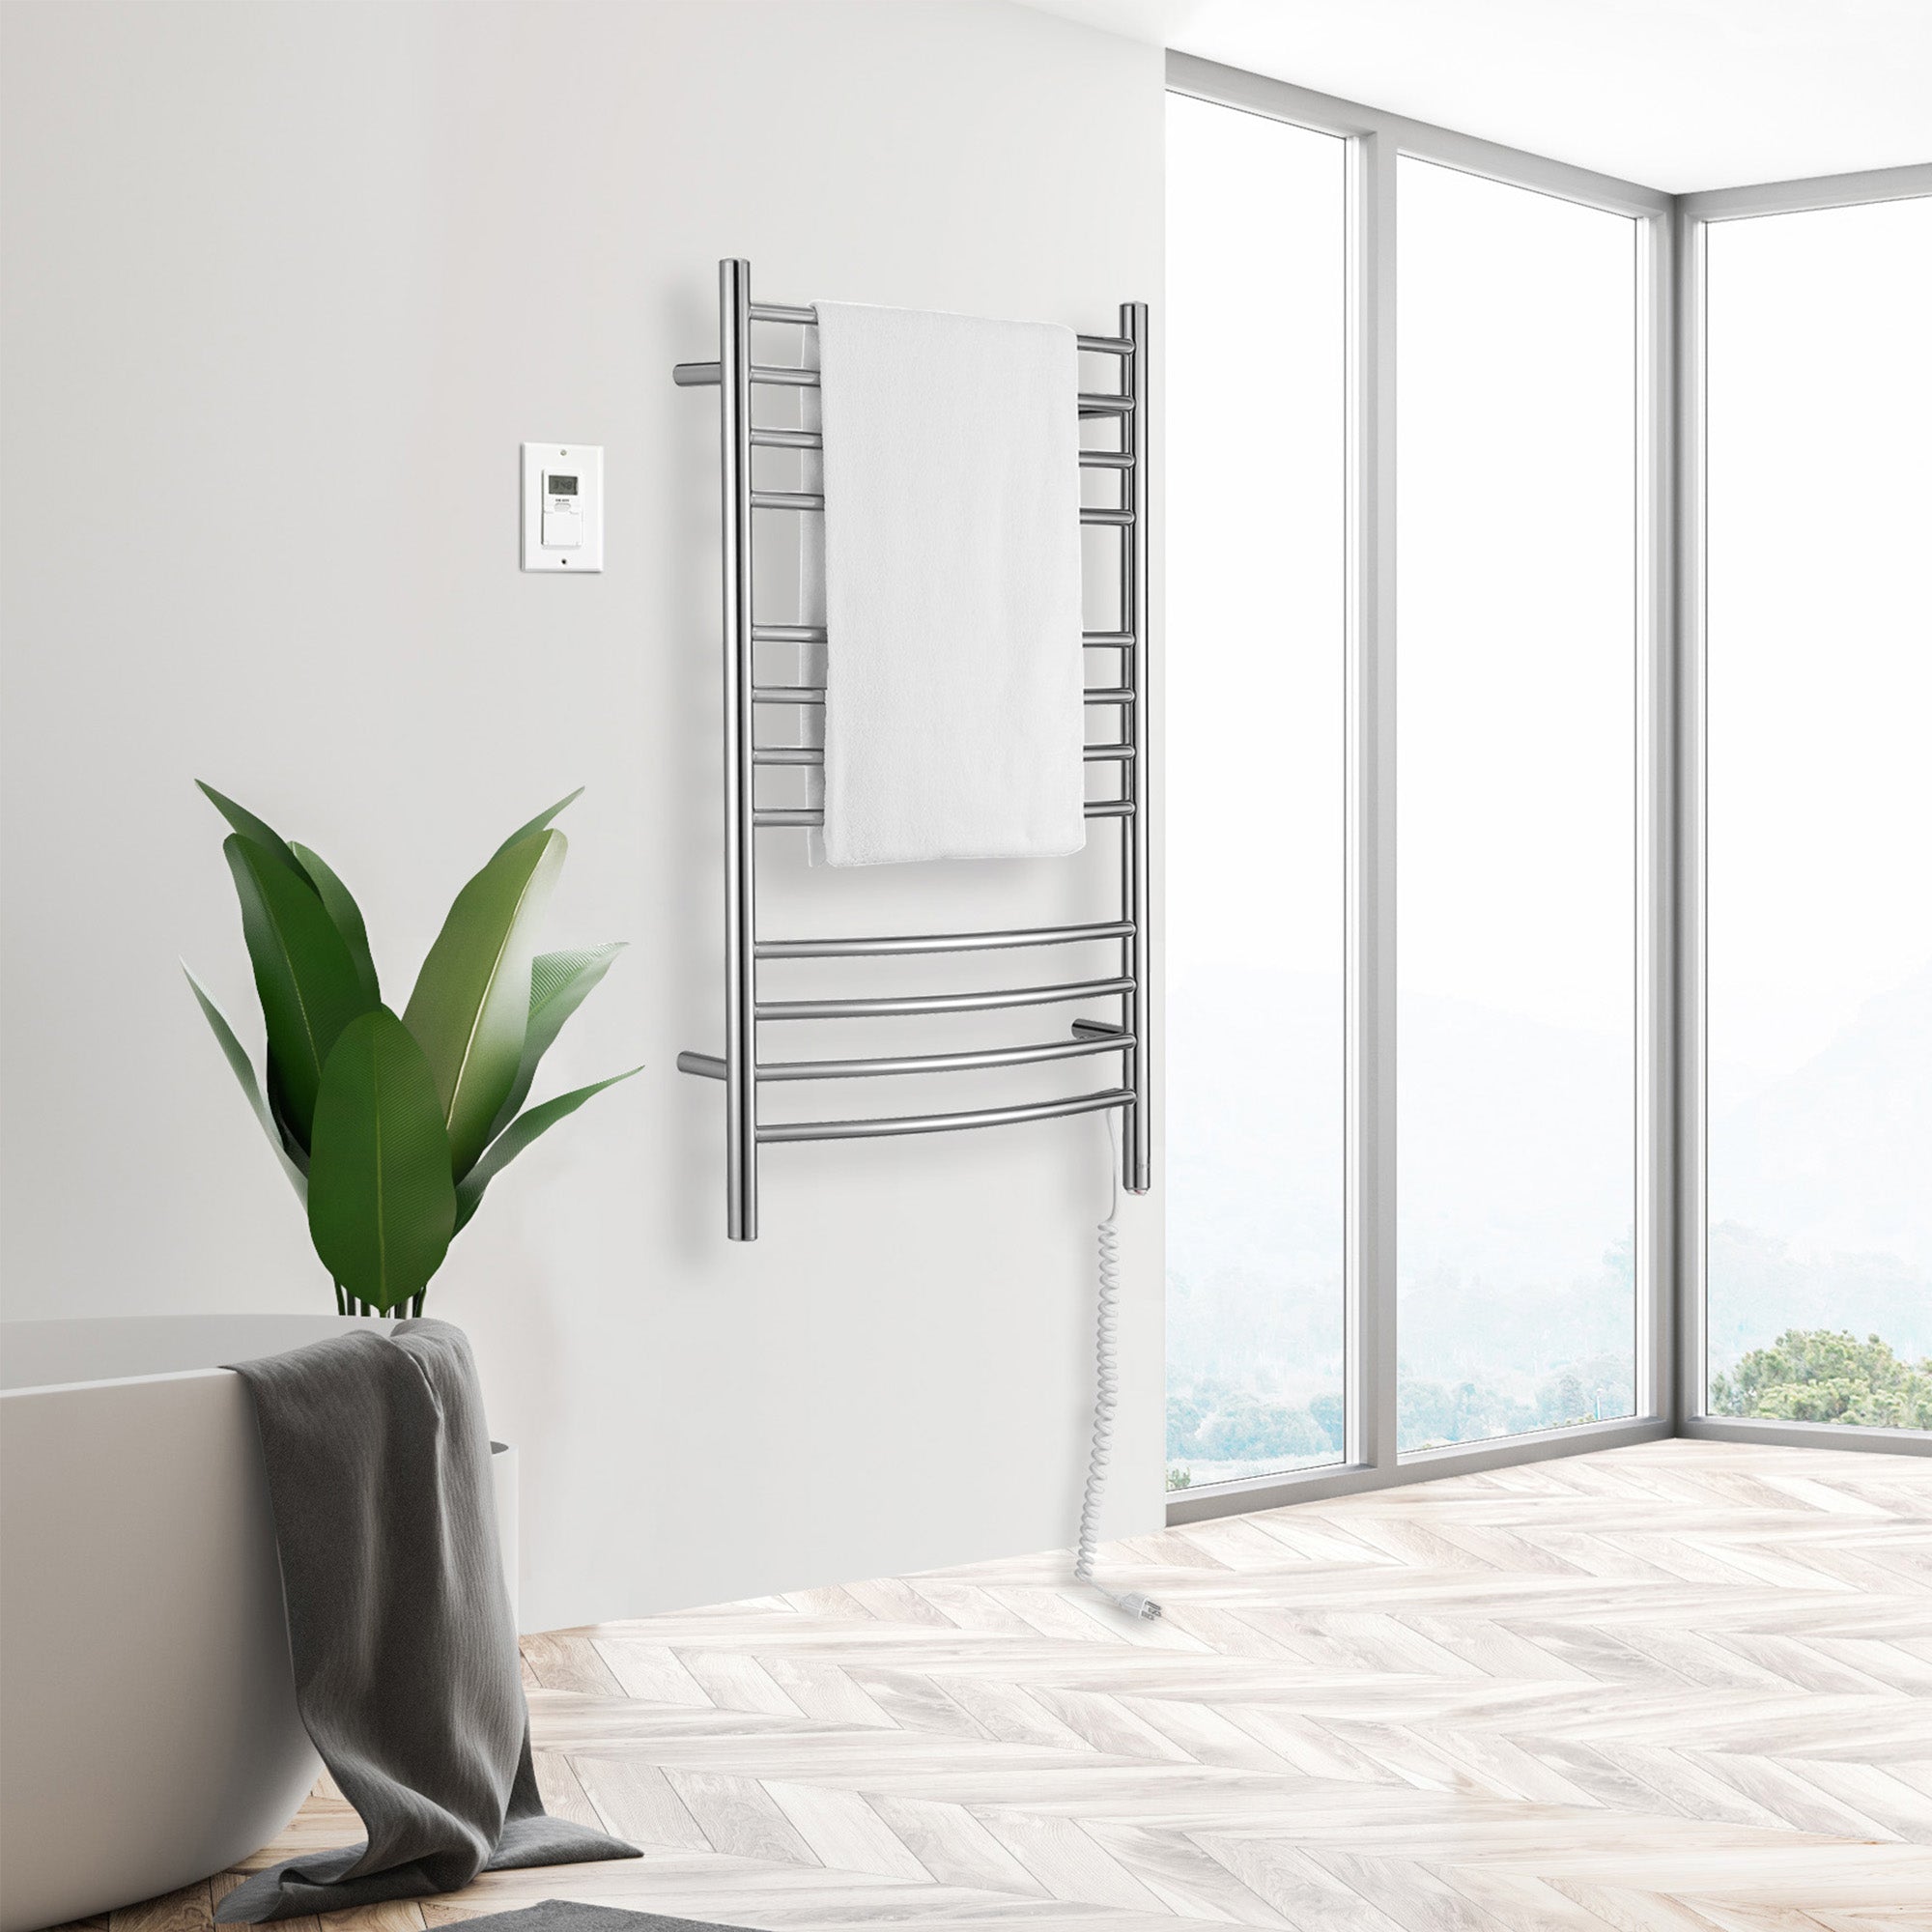 Lustra Dual 12 Curved Bar Hardwired and Plug-in Towel Warmer in Polished Stainless Steel with Digital Wall Timer